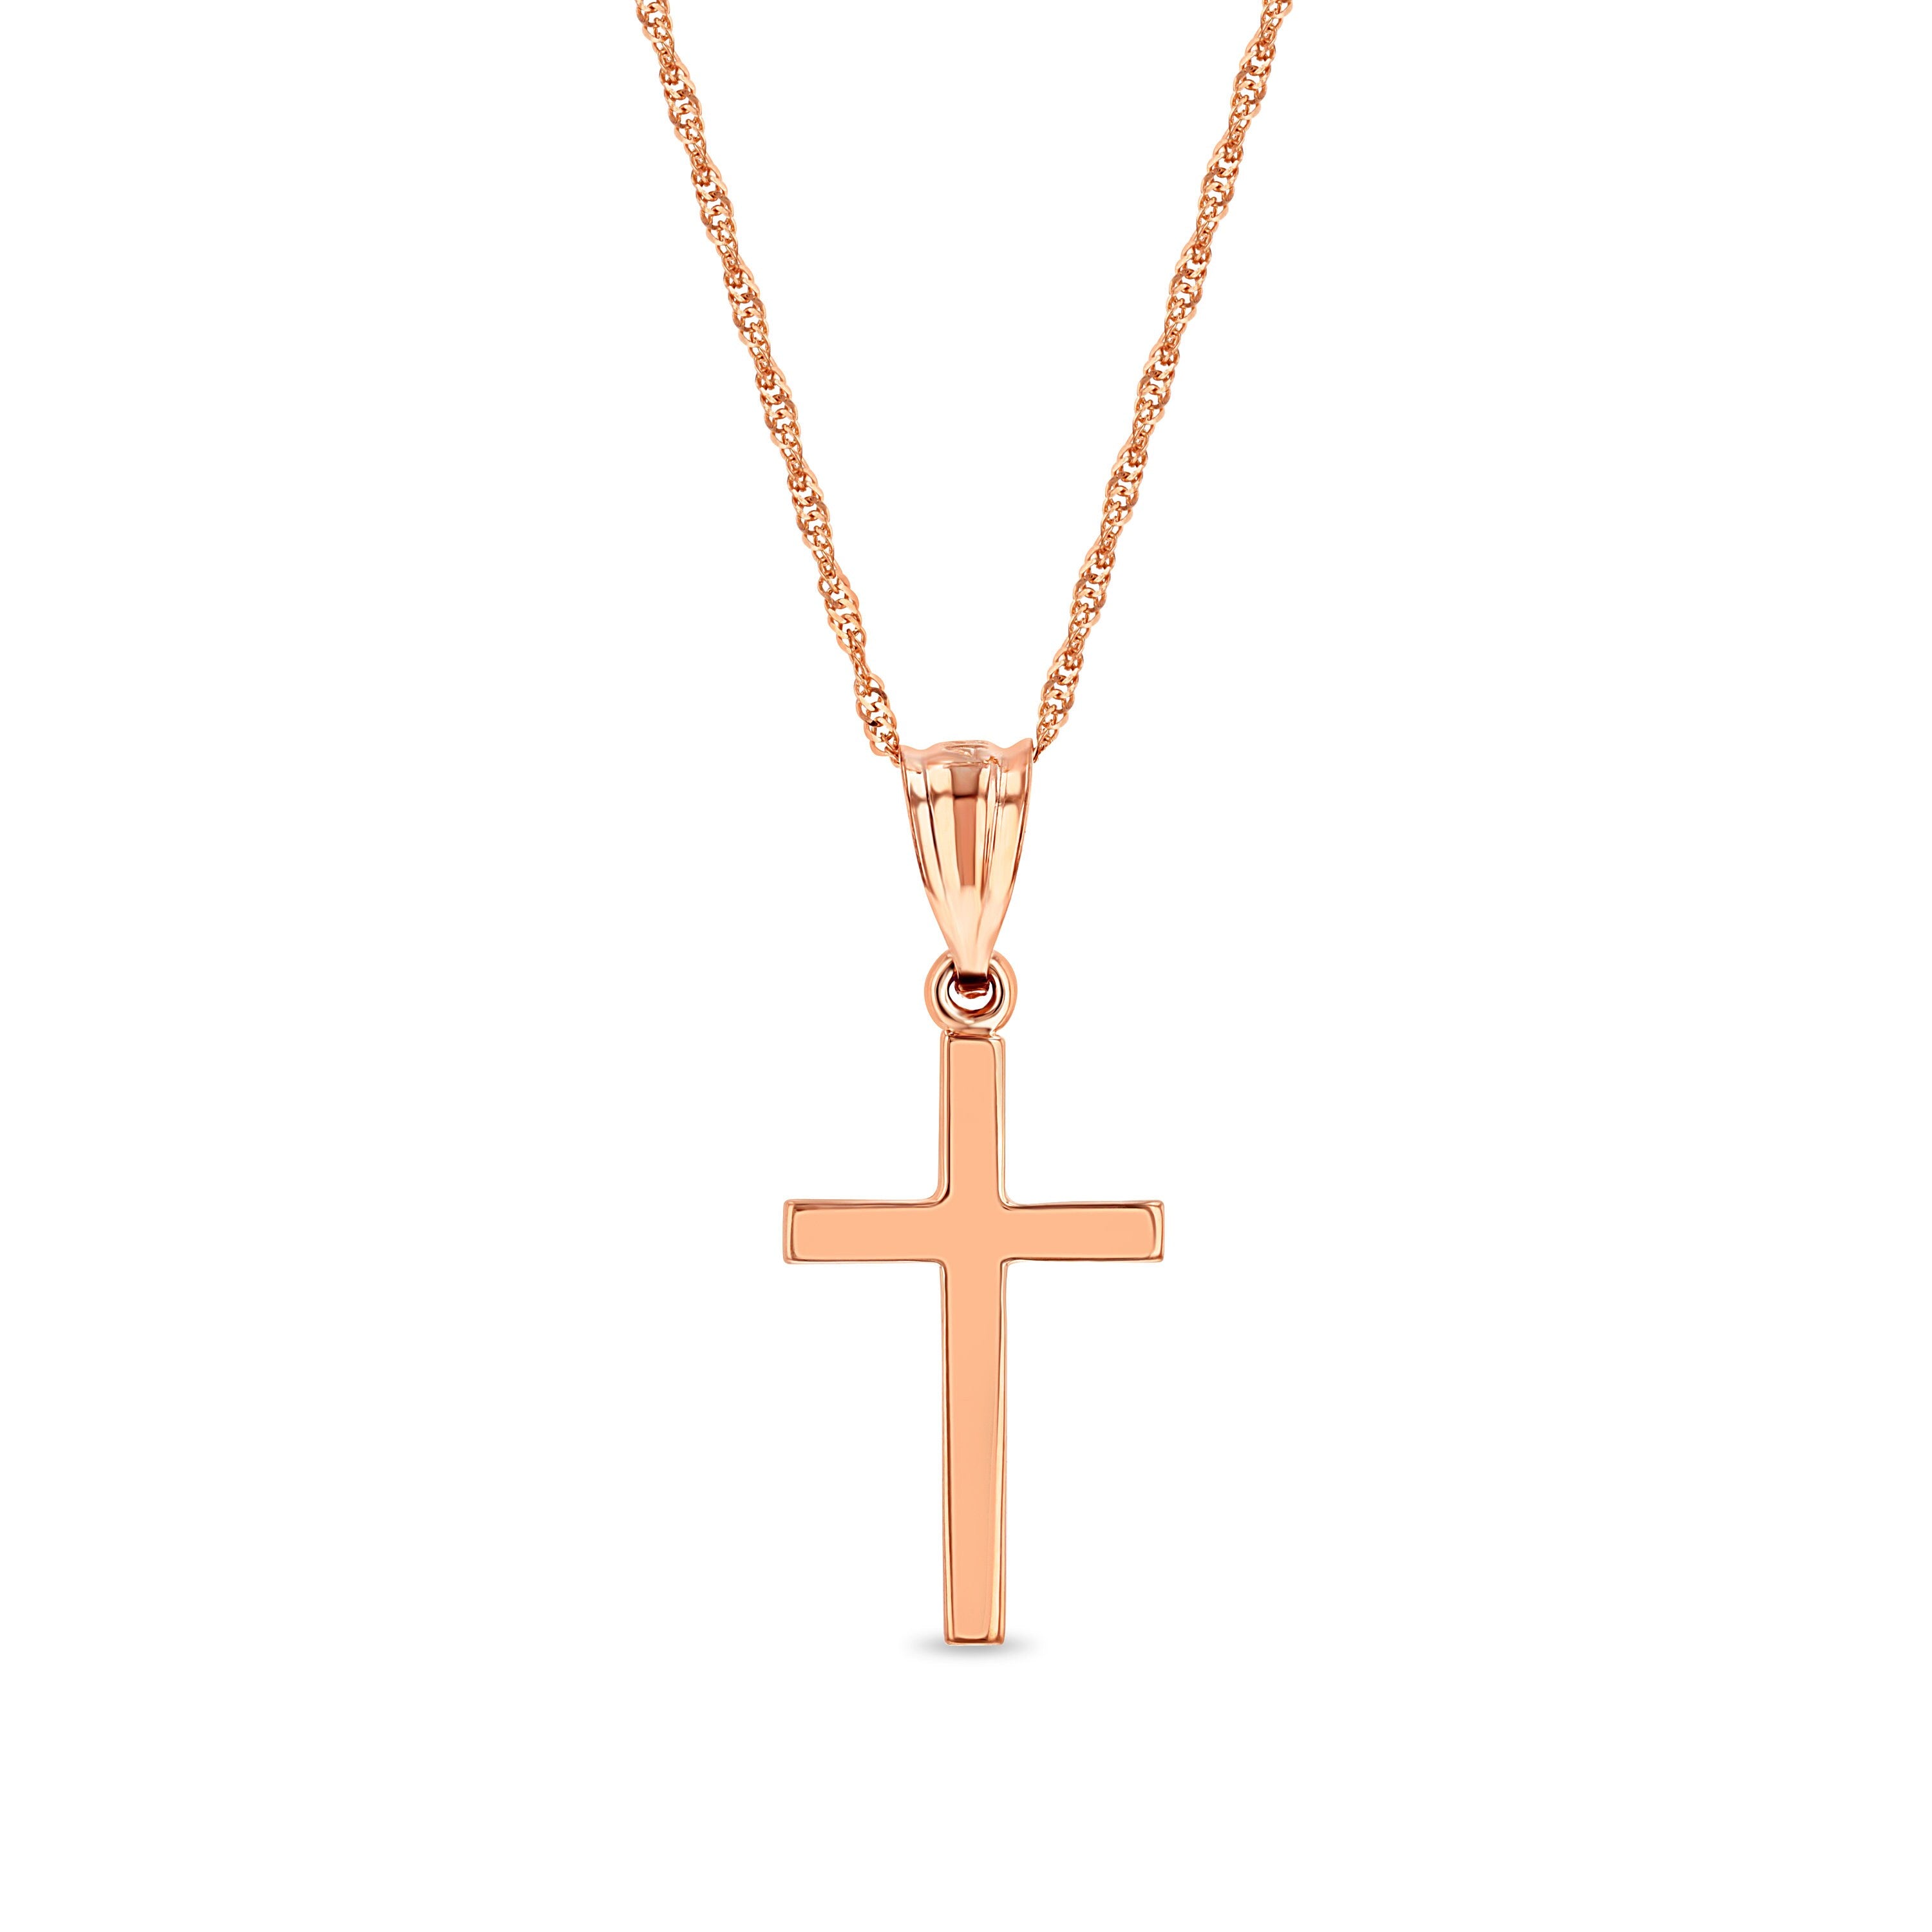 14k solid gold high polish cross on 18" solid gold chain